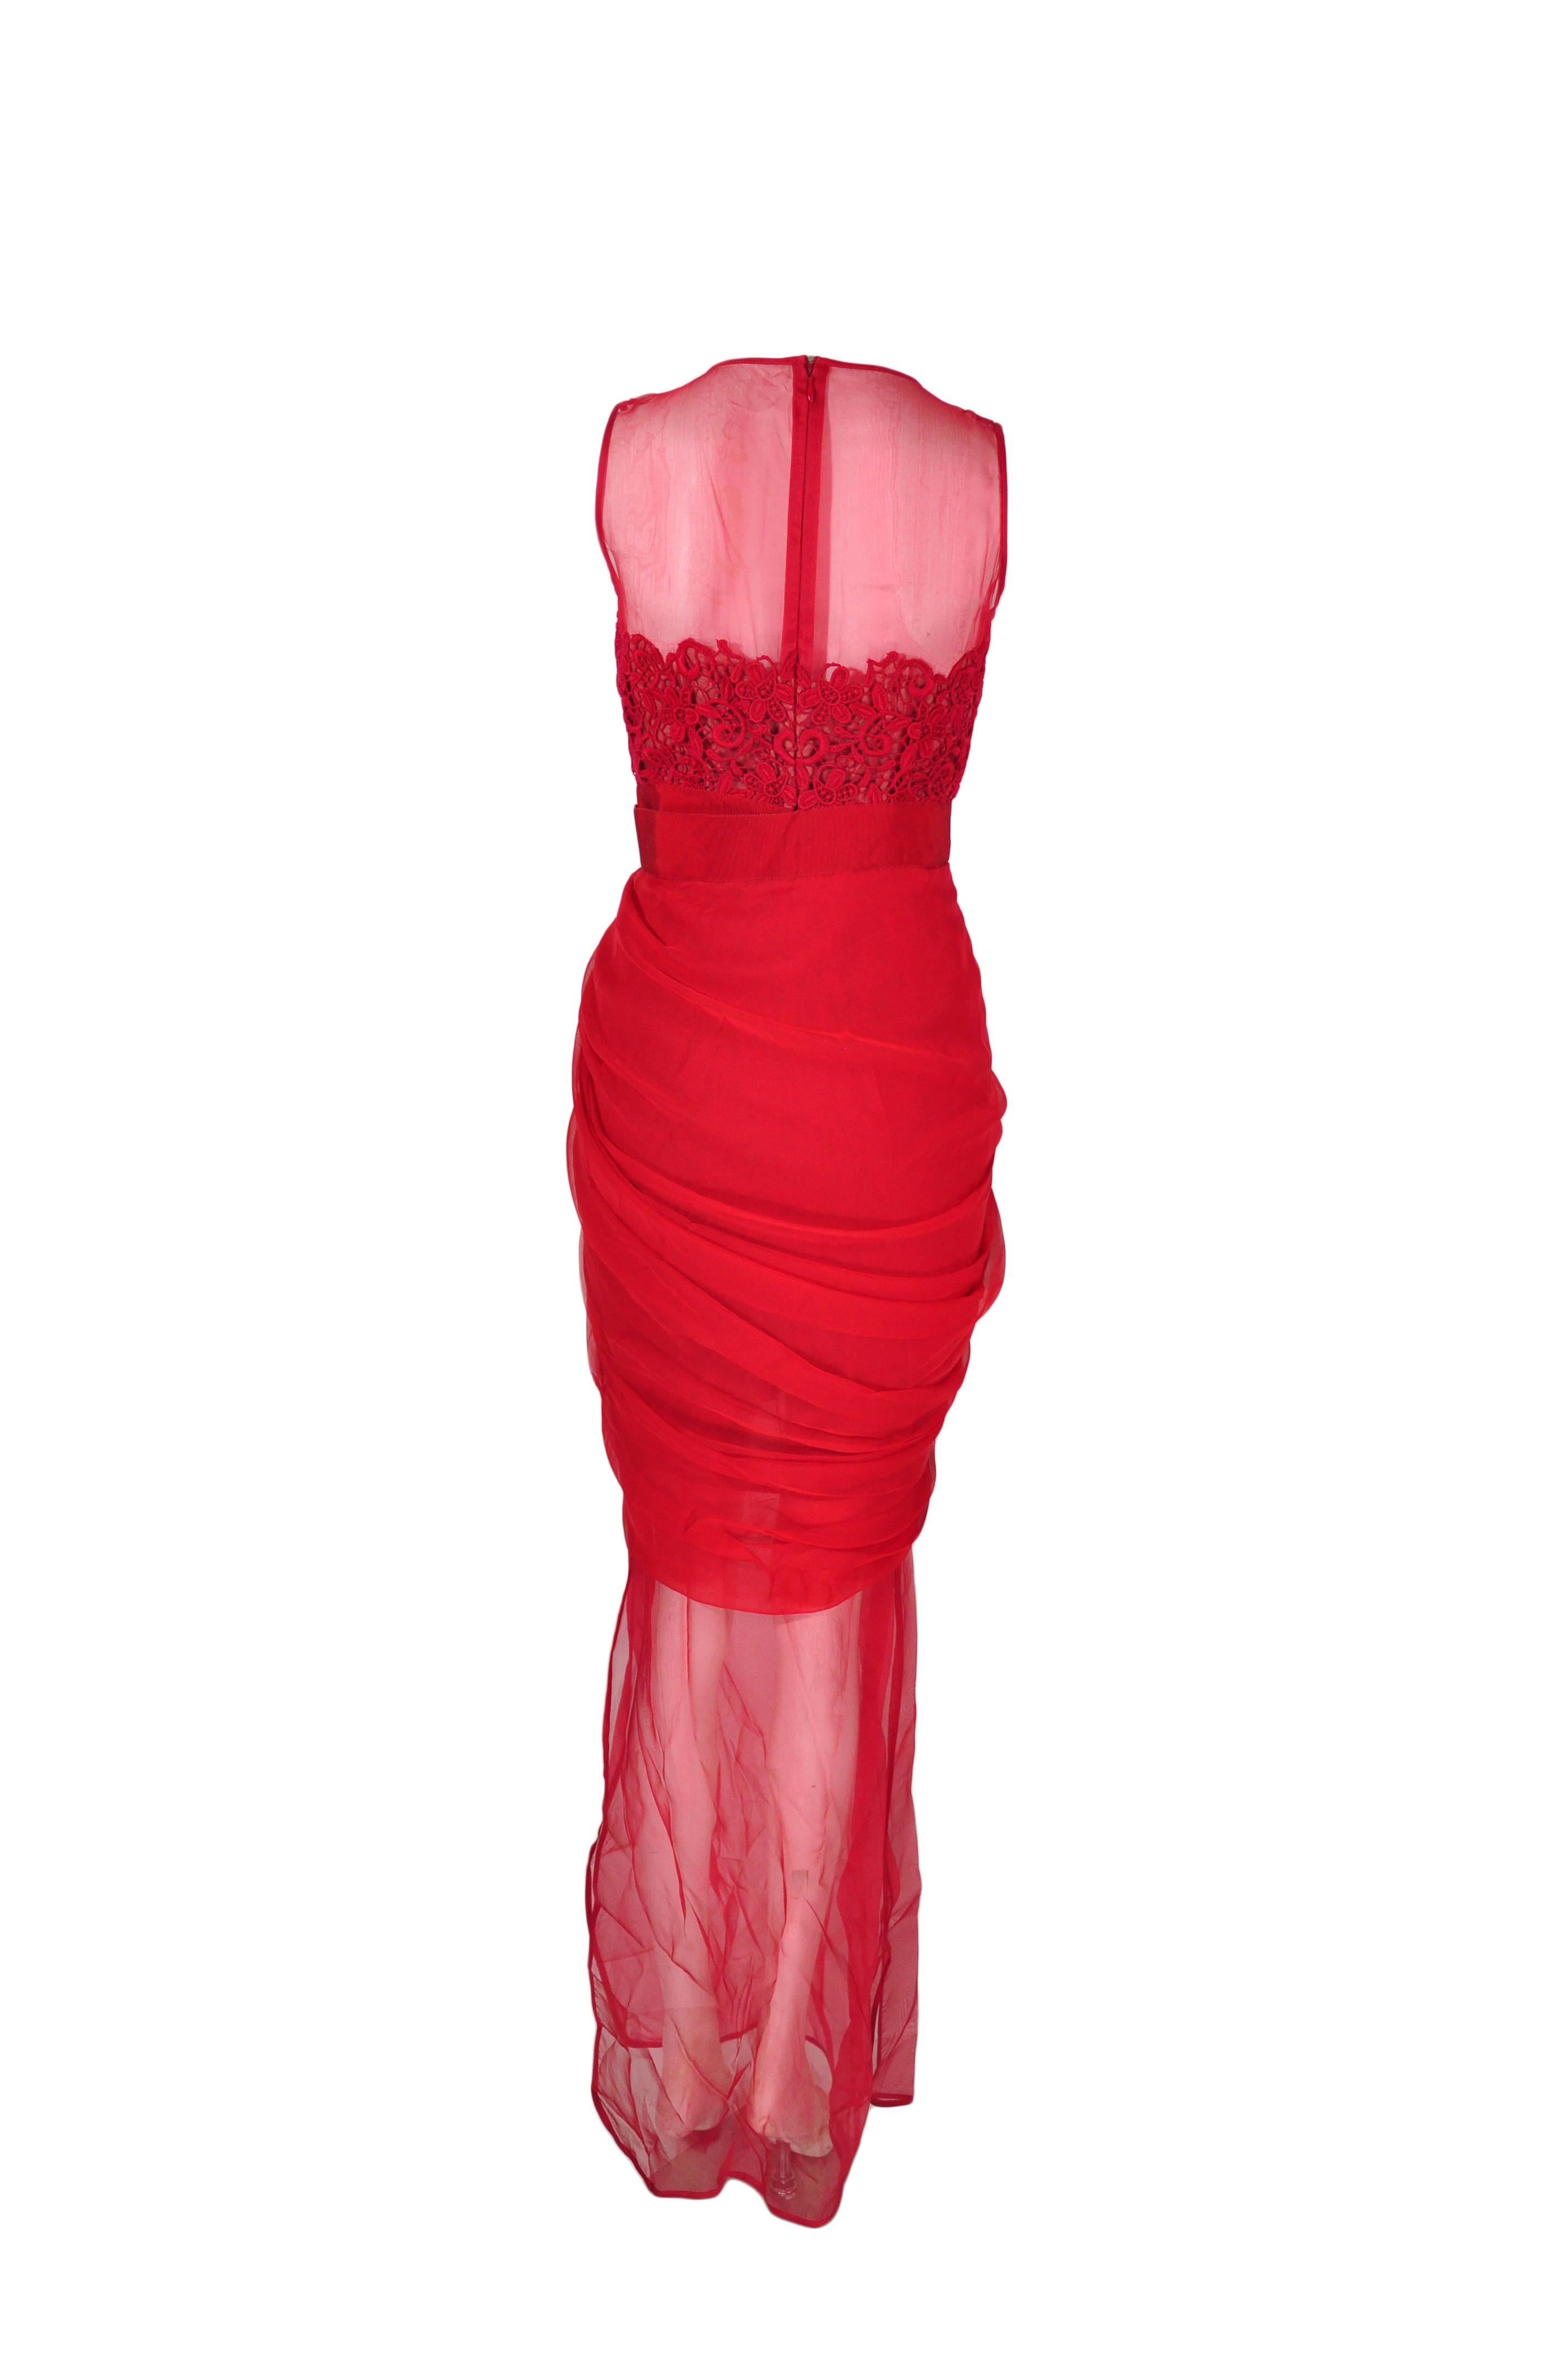 Giambattista Valli Red & Sheer Guipure Lace Appliqued Evening Dress In Excellent Condition For Sale In Hong Kong, Hong Kong